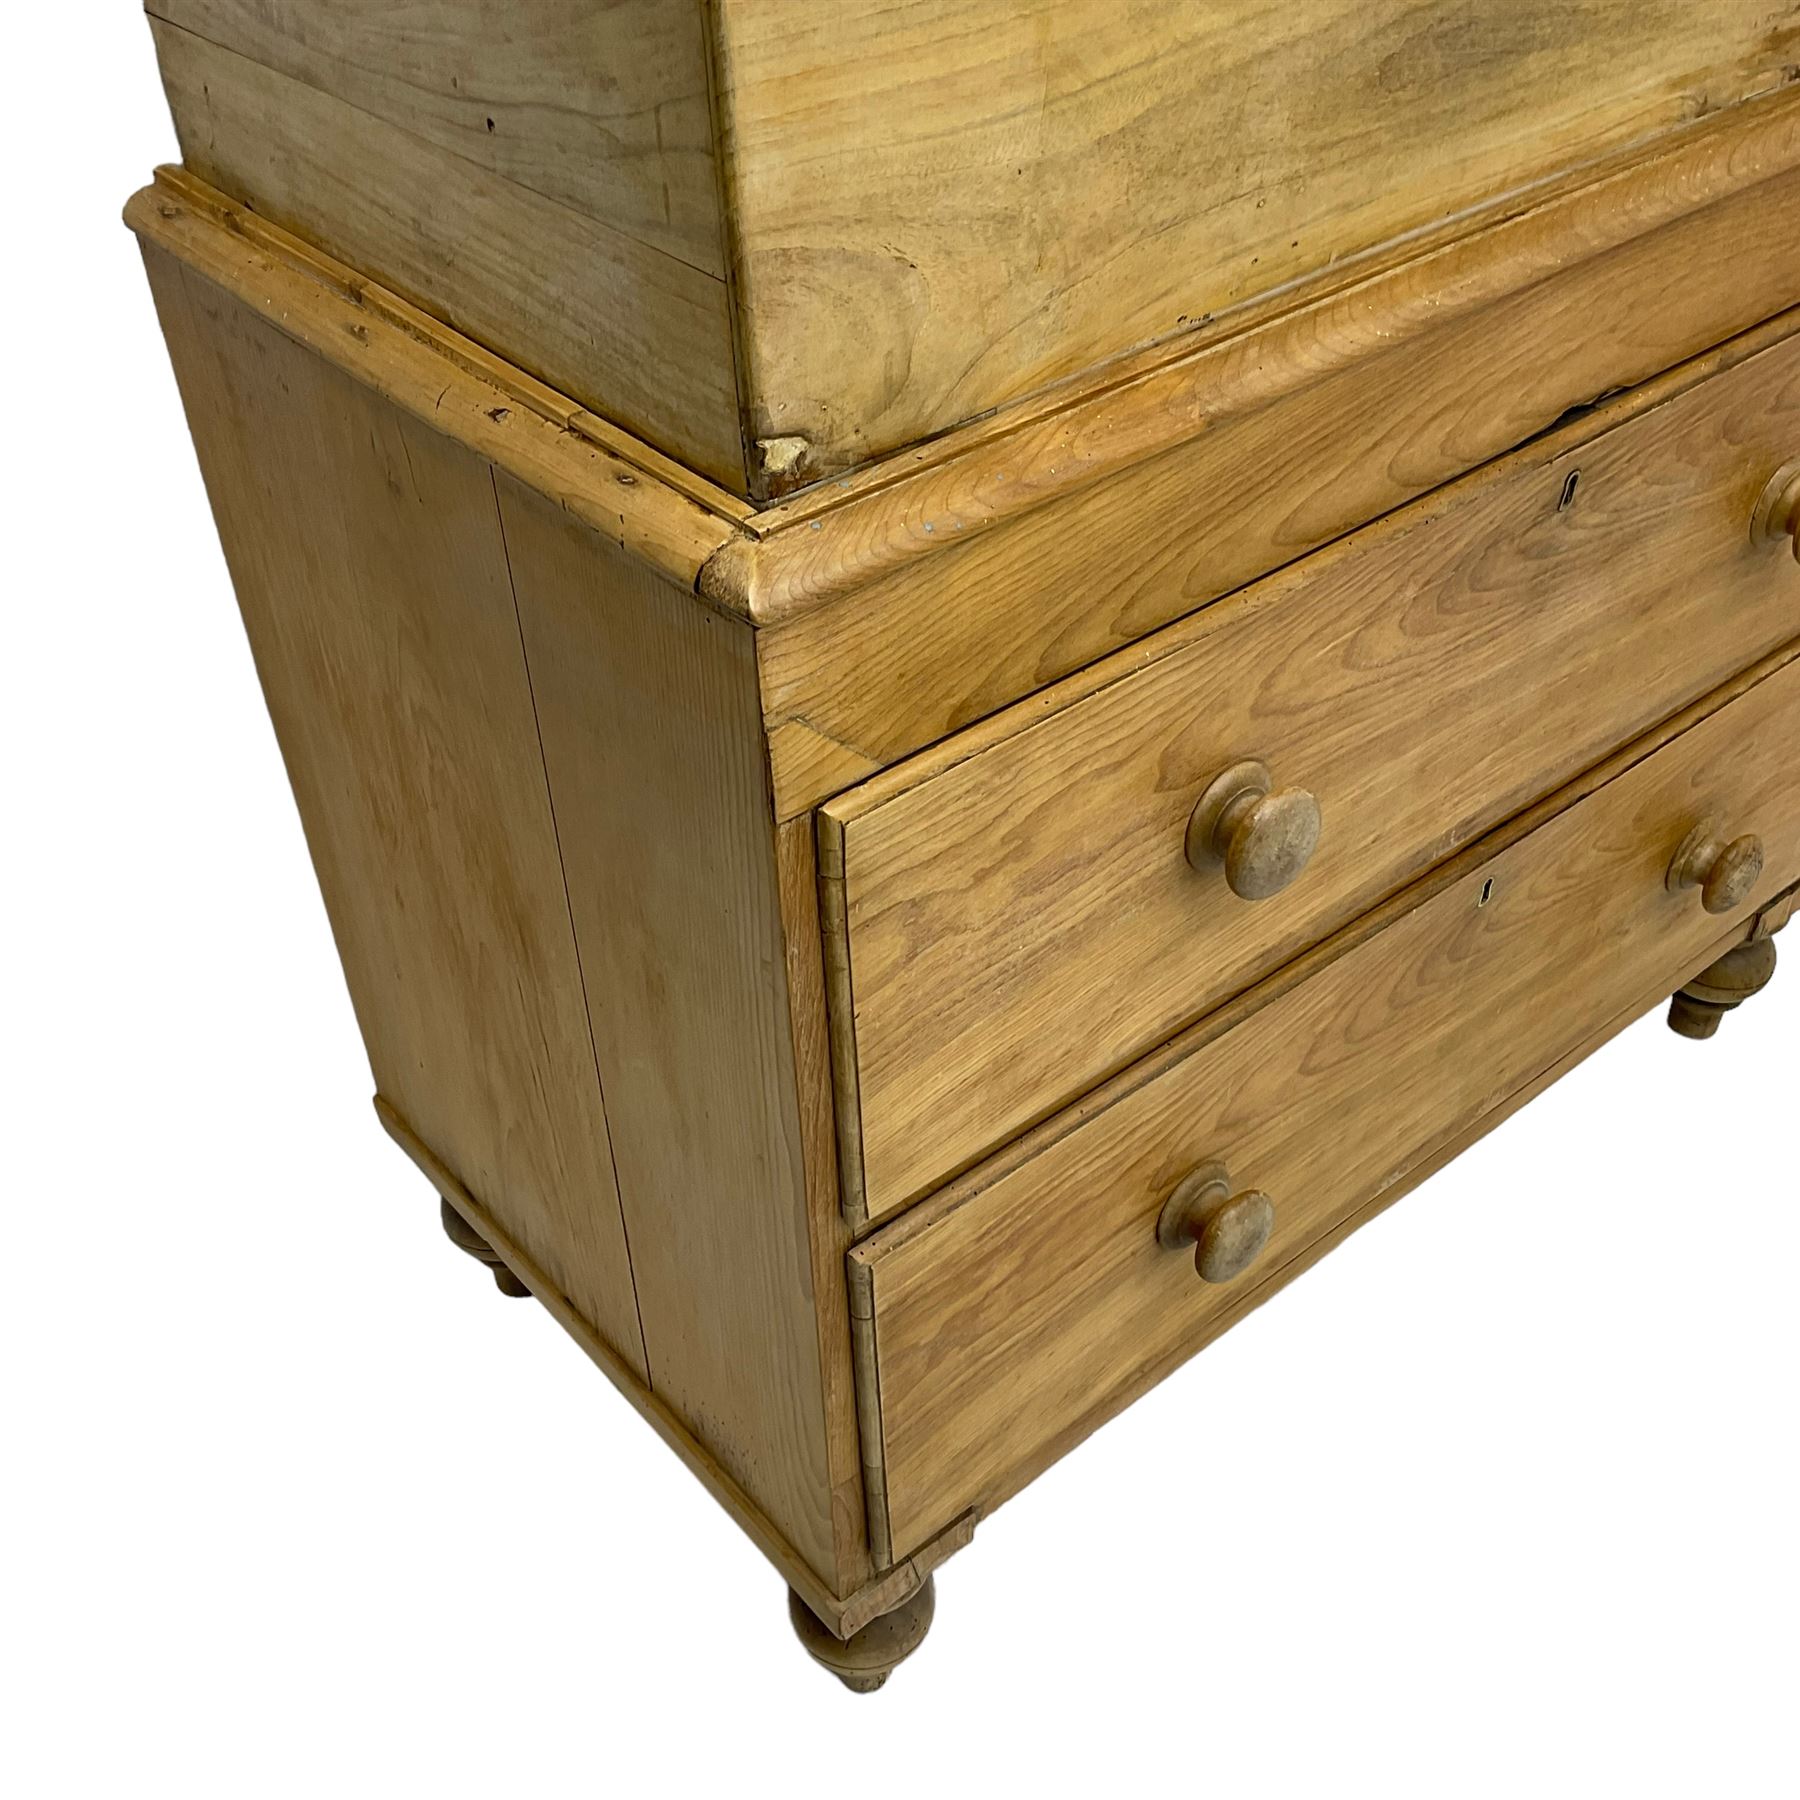 19th century camphor wood and pine chest on chest - Image 2 of 8